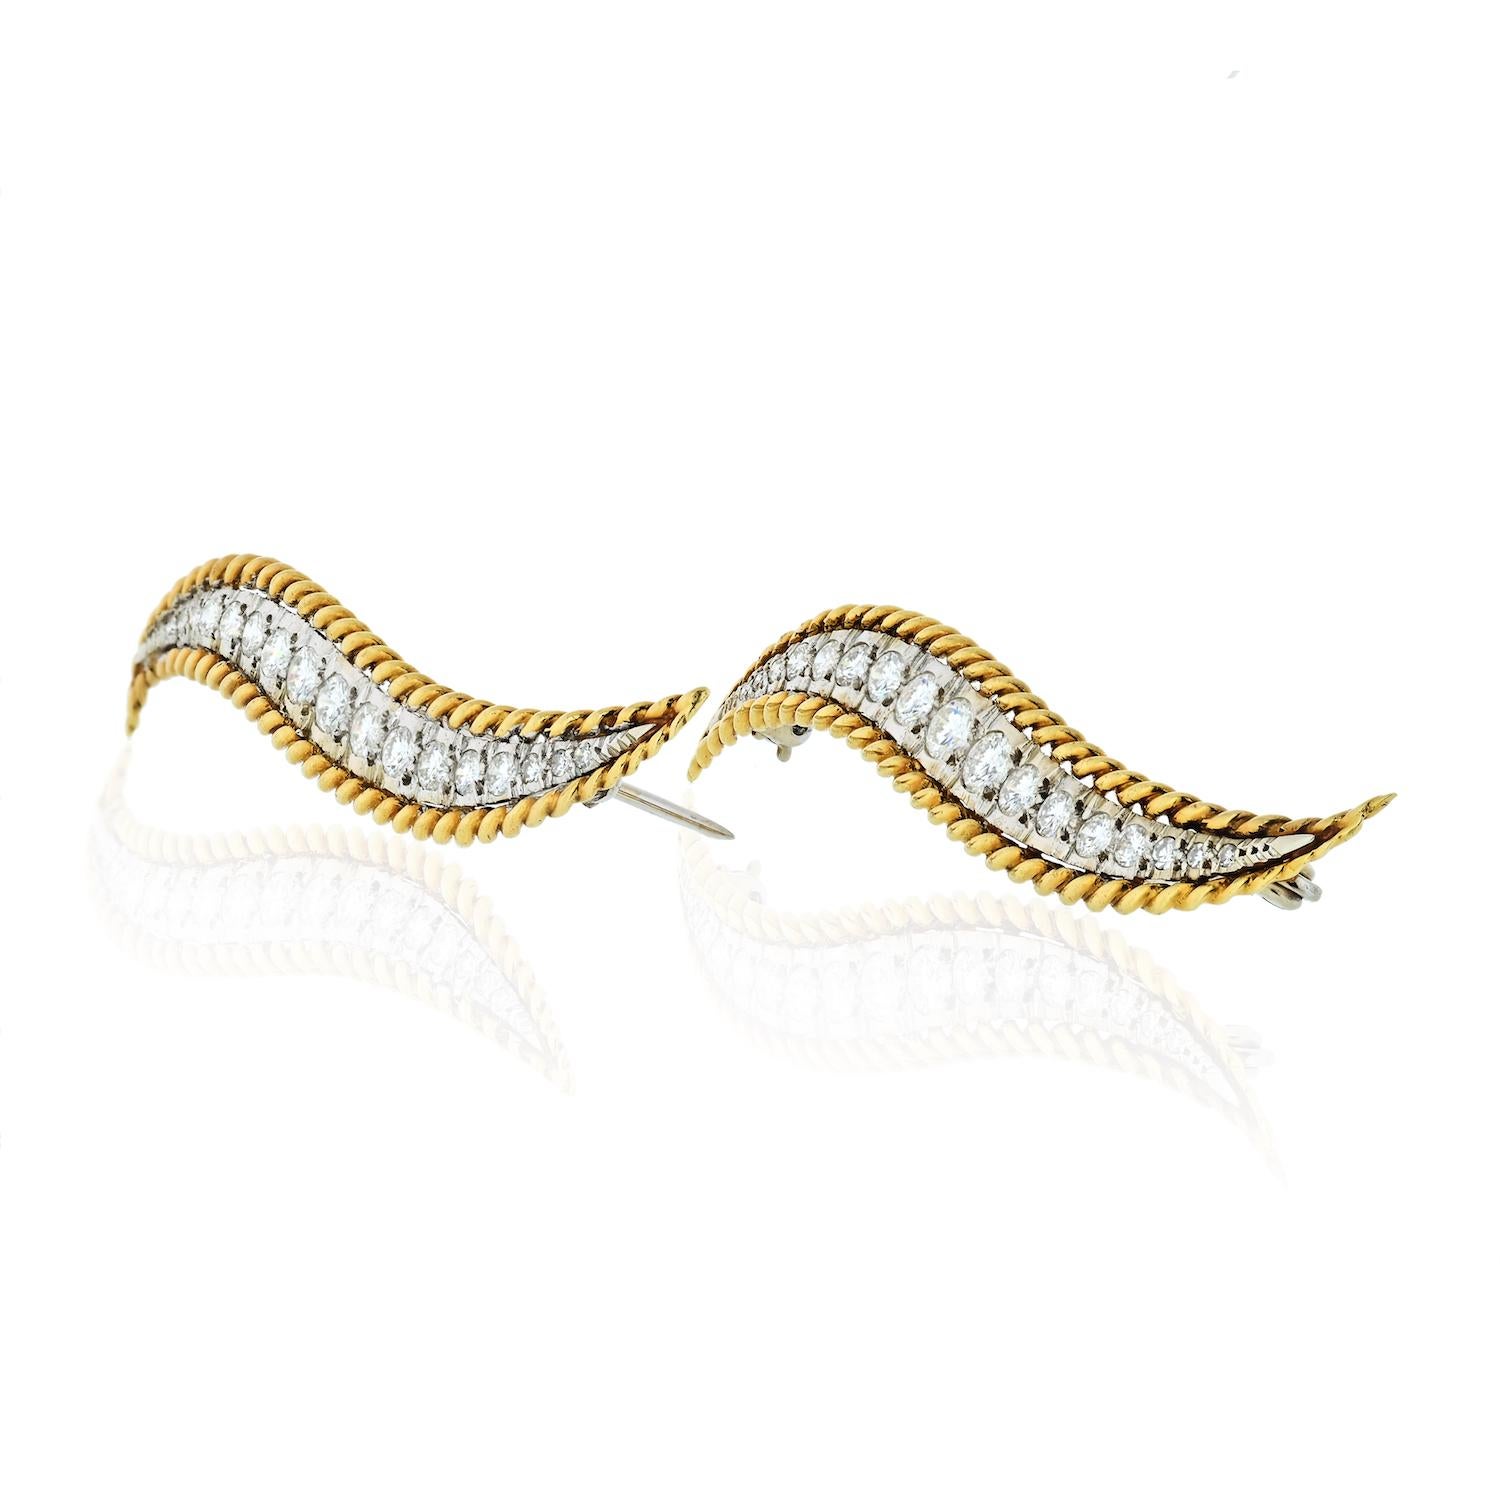 This is a beautiful Van Cleef & Arpels platinum and yellow gold brooch set comprised of two stunning brooches featuring full-cut diamonds approx. 2.50cts in diamond weight, rope twist accents. 

Each brooch is about 2.25inches long and 8.4mm wide at